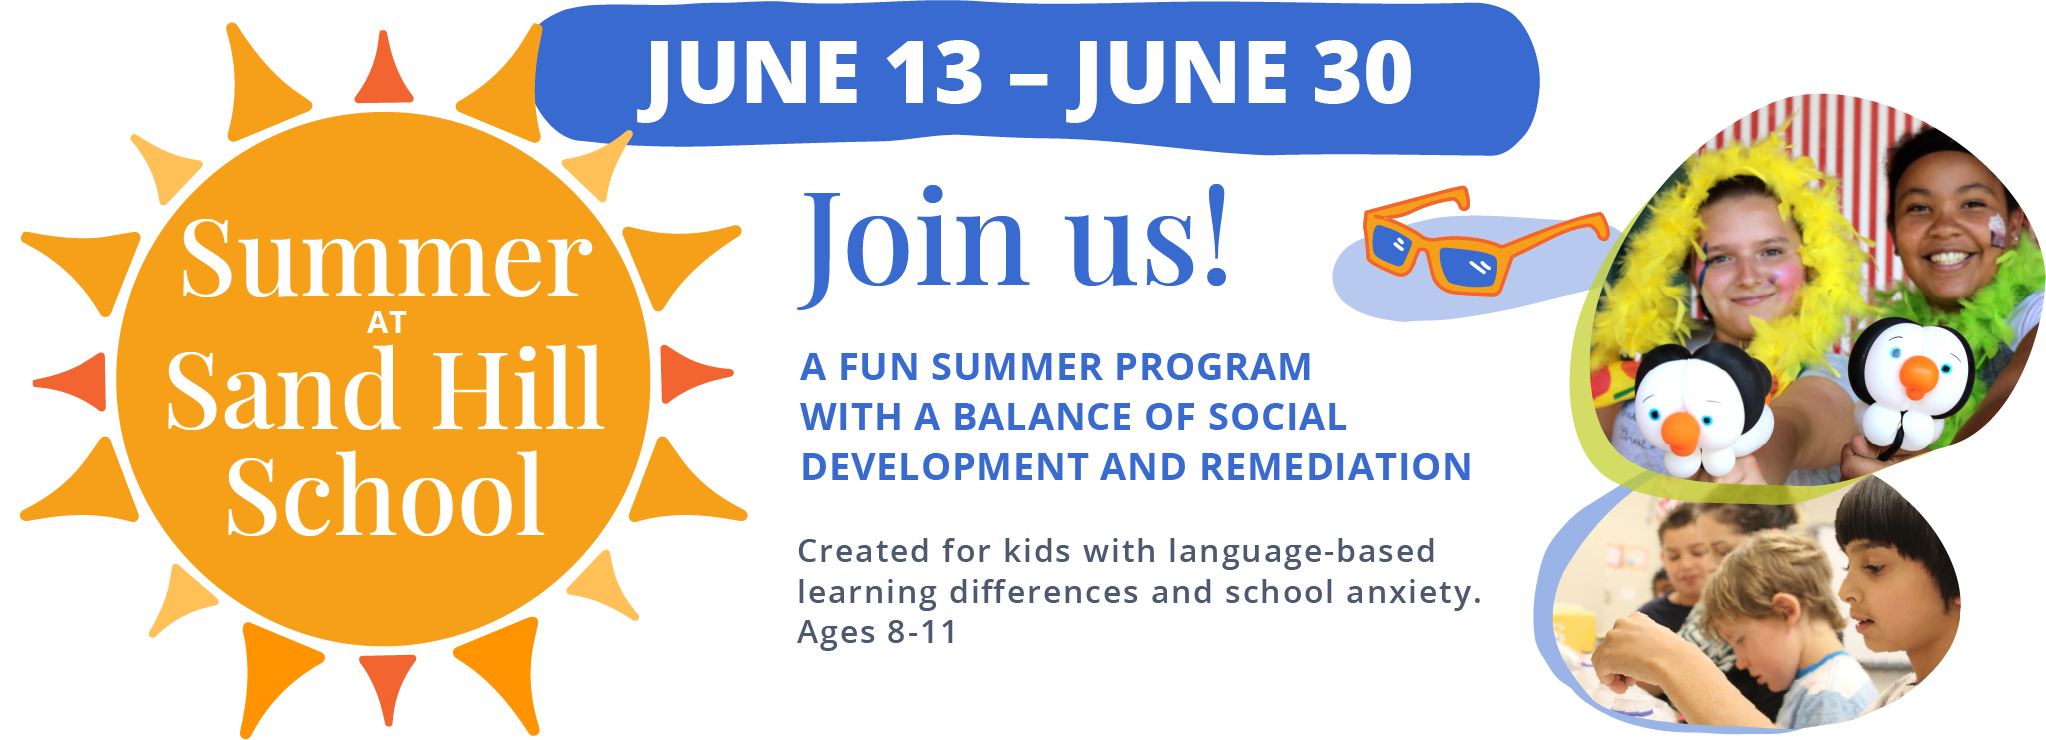 Summer at Sand Hill School. June 13 - June 30. Join us! A fun summer program with a balance of social development and remediation. Created for kids with language-based learning differences and school anxiety. Ages 8-11